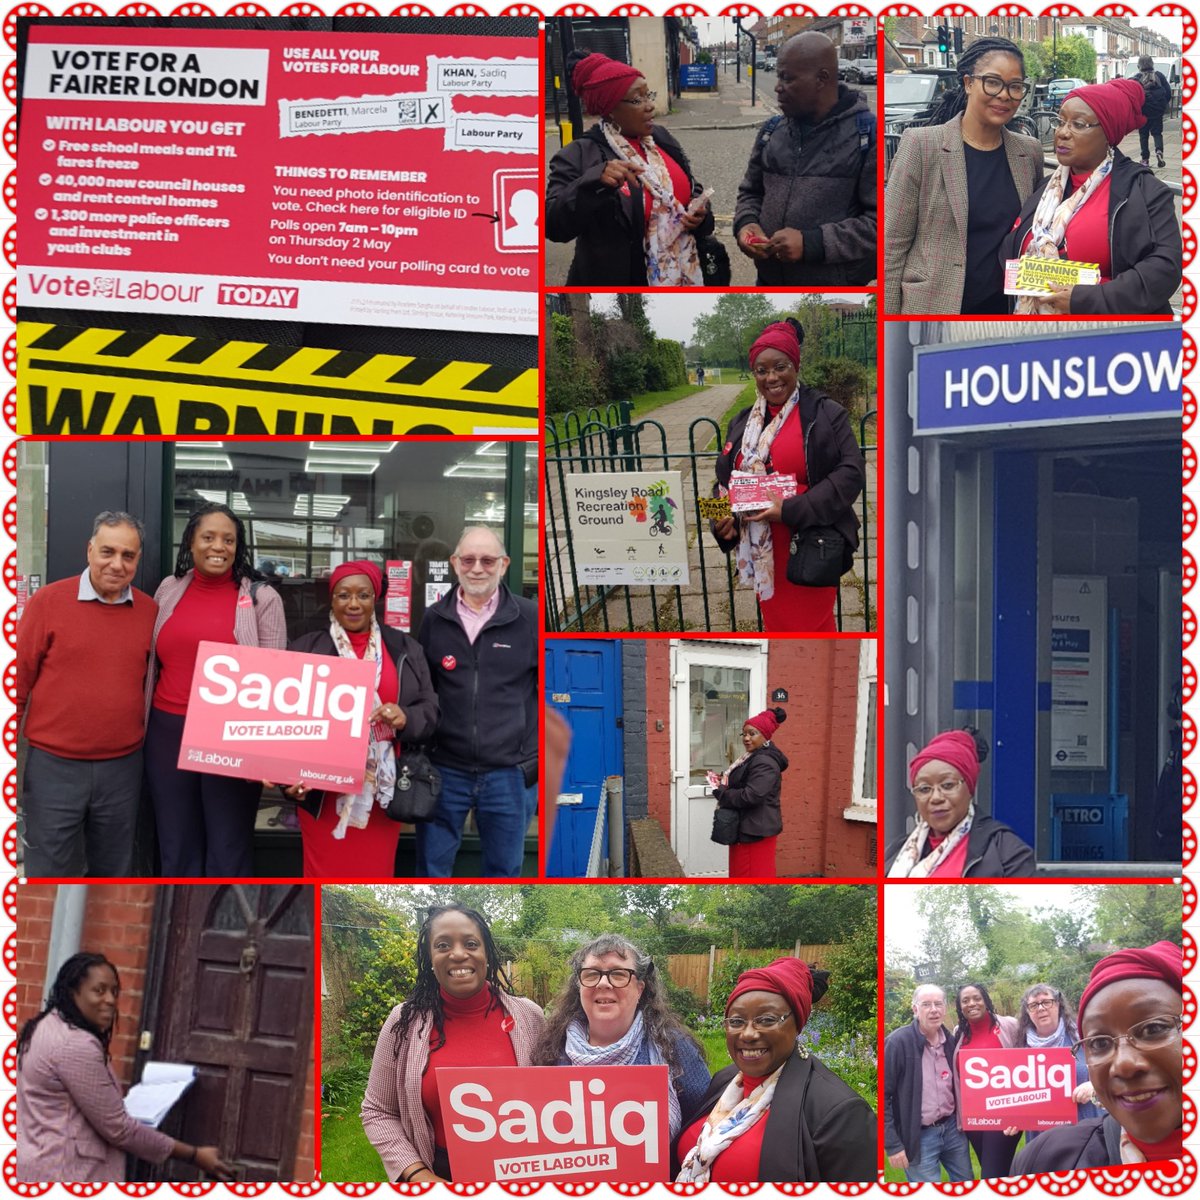 In Hounslow: @Shansview @grewal_pritam Final push to #GOTV for Mayoral Candidate @SadiqKhan & GLA candidate Marcela @MarcelaBenede10 Thursday, #2nd May. Make your voice heard #VOTE #LondonLabour Now back to #BenshamManorWard GOTV for Maddie @MinsuR